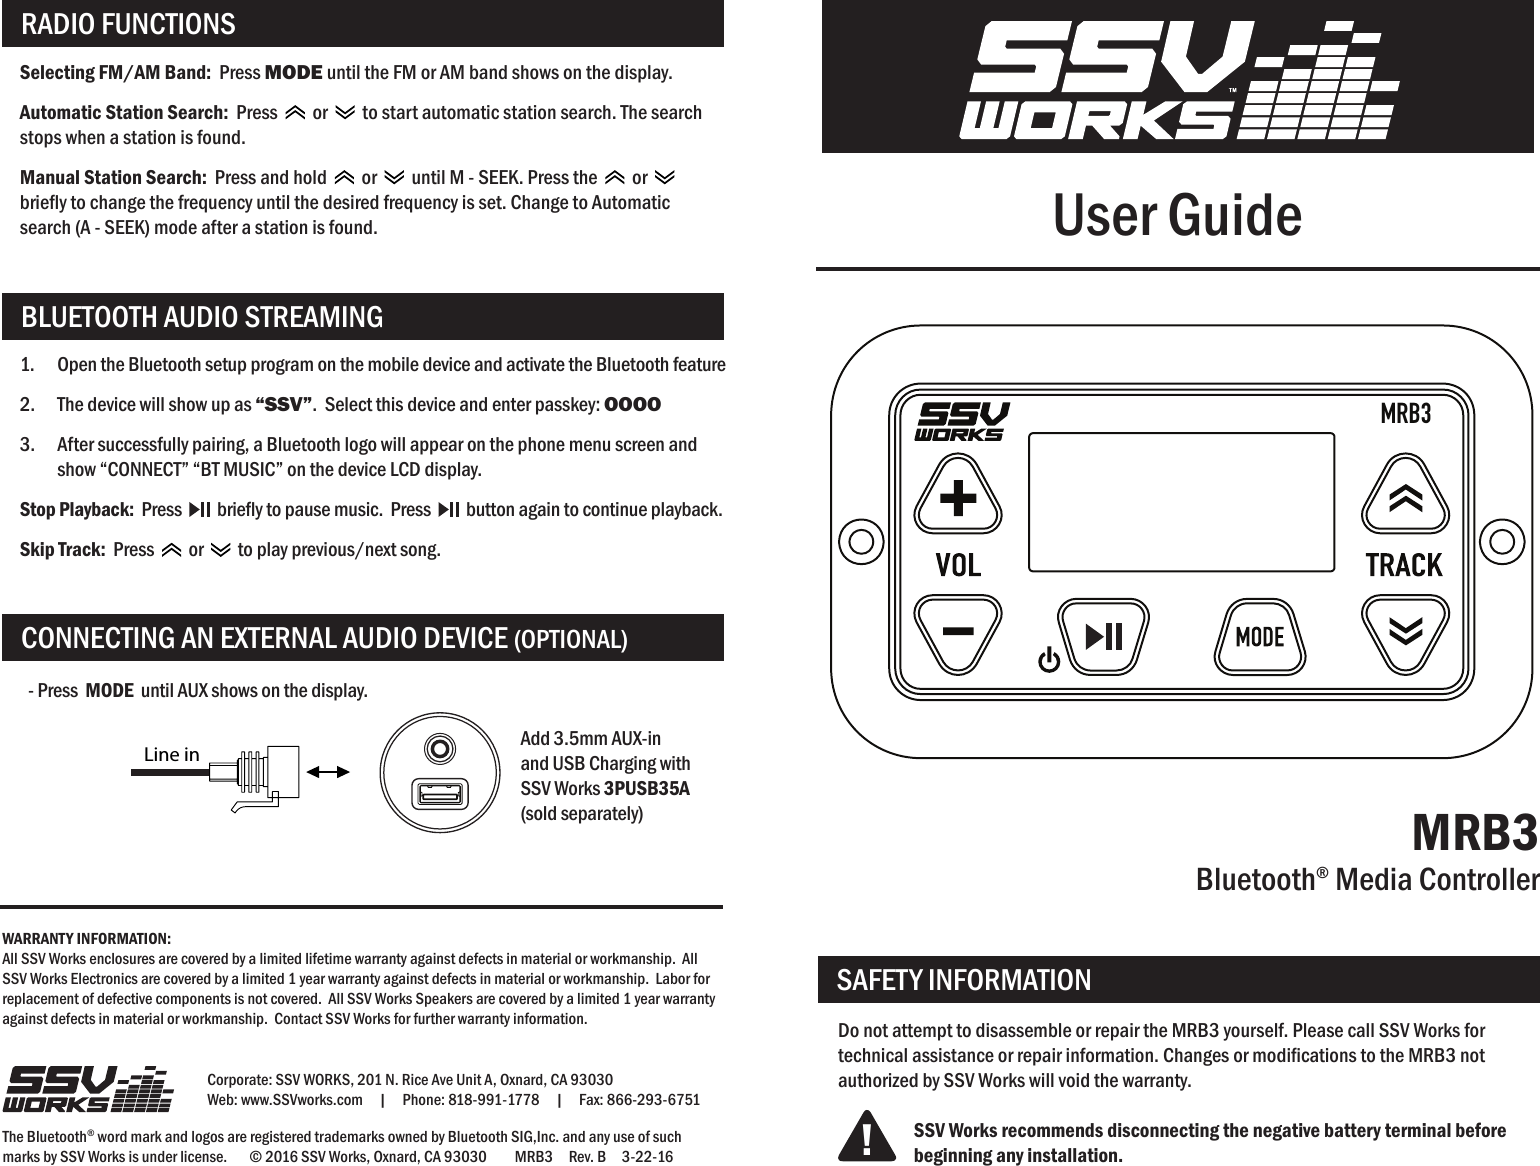 User GuideMRB3Bluetooth® Media ControllerCorporate: SSV WORKS, 201 N. Rice Ave Unit A, Oxnard, CA 93030Web: www.SSVworks.com     |     Phone: 818-991-1778     |     Fax: 866-293-6751The Bluetooth® word mark and logos are registered trademarks owned by Bluetooth SIG,Inc. and any use of such marks by SSV Works is under license.       © 2016 SSV Works, Oxnard, CA 93030         MRB3     Rev. B     3-22-16Do not attempt to disassemble or repair the MRB3 yourself. Please call SSV Works for technical assistance or repair information. Changes or modications to the MRB3 not authorized by SSV Works will void the warranty.SSV Works recommends disconnecting the negative battery terminal before beginning any installation.SAFETY INFORMATION!RADIO FUNCTIONSCONNECTING AN EXTERNAL AUDIO DEVICE (OPTIONAL)BLUETOOTH AUDIO STREAMINGMRB3WARRANTY INFORMATION:All SSV Works enclosures are covered by a limited lifetime warranty against defects in material or workmanship.  All SSV Works Electronics are covered by a limited 1 year warranty against defects in material or workmanship.  Labor for replacement of defective components is not covered.  All SSV Works Speakers are covered by a limited 1 year warranty against defects in material or workmanship.  Contact SSV Works for further warranty information.Selecting FM/AM Band:  Press MODE until the FM or AM band shows on the display. Automatic Station Search:  Press     or     to start automatic station search. The search stops when a station is found.Manual Station Search:  Press and hold     or     until M - SEEK. Press the     or  briey to change the frequency until the desired frequency is set. Change to Automatic search (A - SEEK) mode after a station is found.- Press  MODE  until AUX shows on the display.Add 3.5mm AUX-in and USB Charging with SSV Works 3PUSB35A  (sold separately)1.  Open the Bluetooth setup program on the mobile device and activate the Bluetooth feature2.  The device will show up as “SSV”.  Select this device and enter passkey: OOOO3.  After successfully pairing, a Bluetooth logo will appear on the phone menu screen and show “CONNECT” “BT MUSIC” on the device LCD display.Stop Playback:  Press     briey to pause music.  Press     button again to continue playback.Skip Track:  Press     or     to play previous/next song.Line in